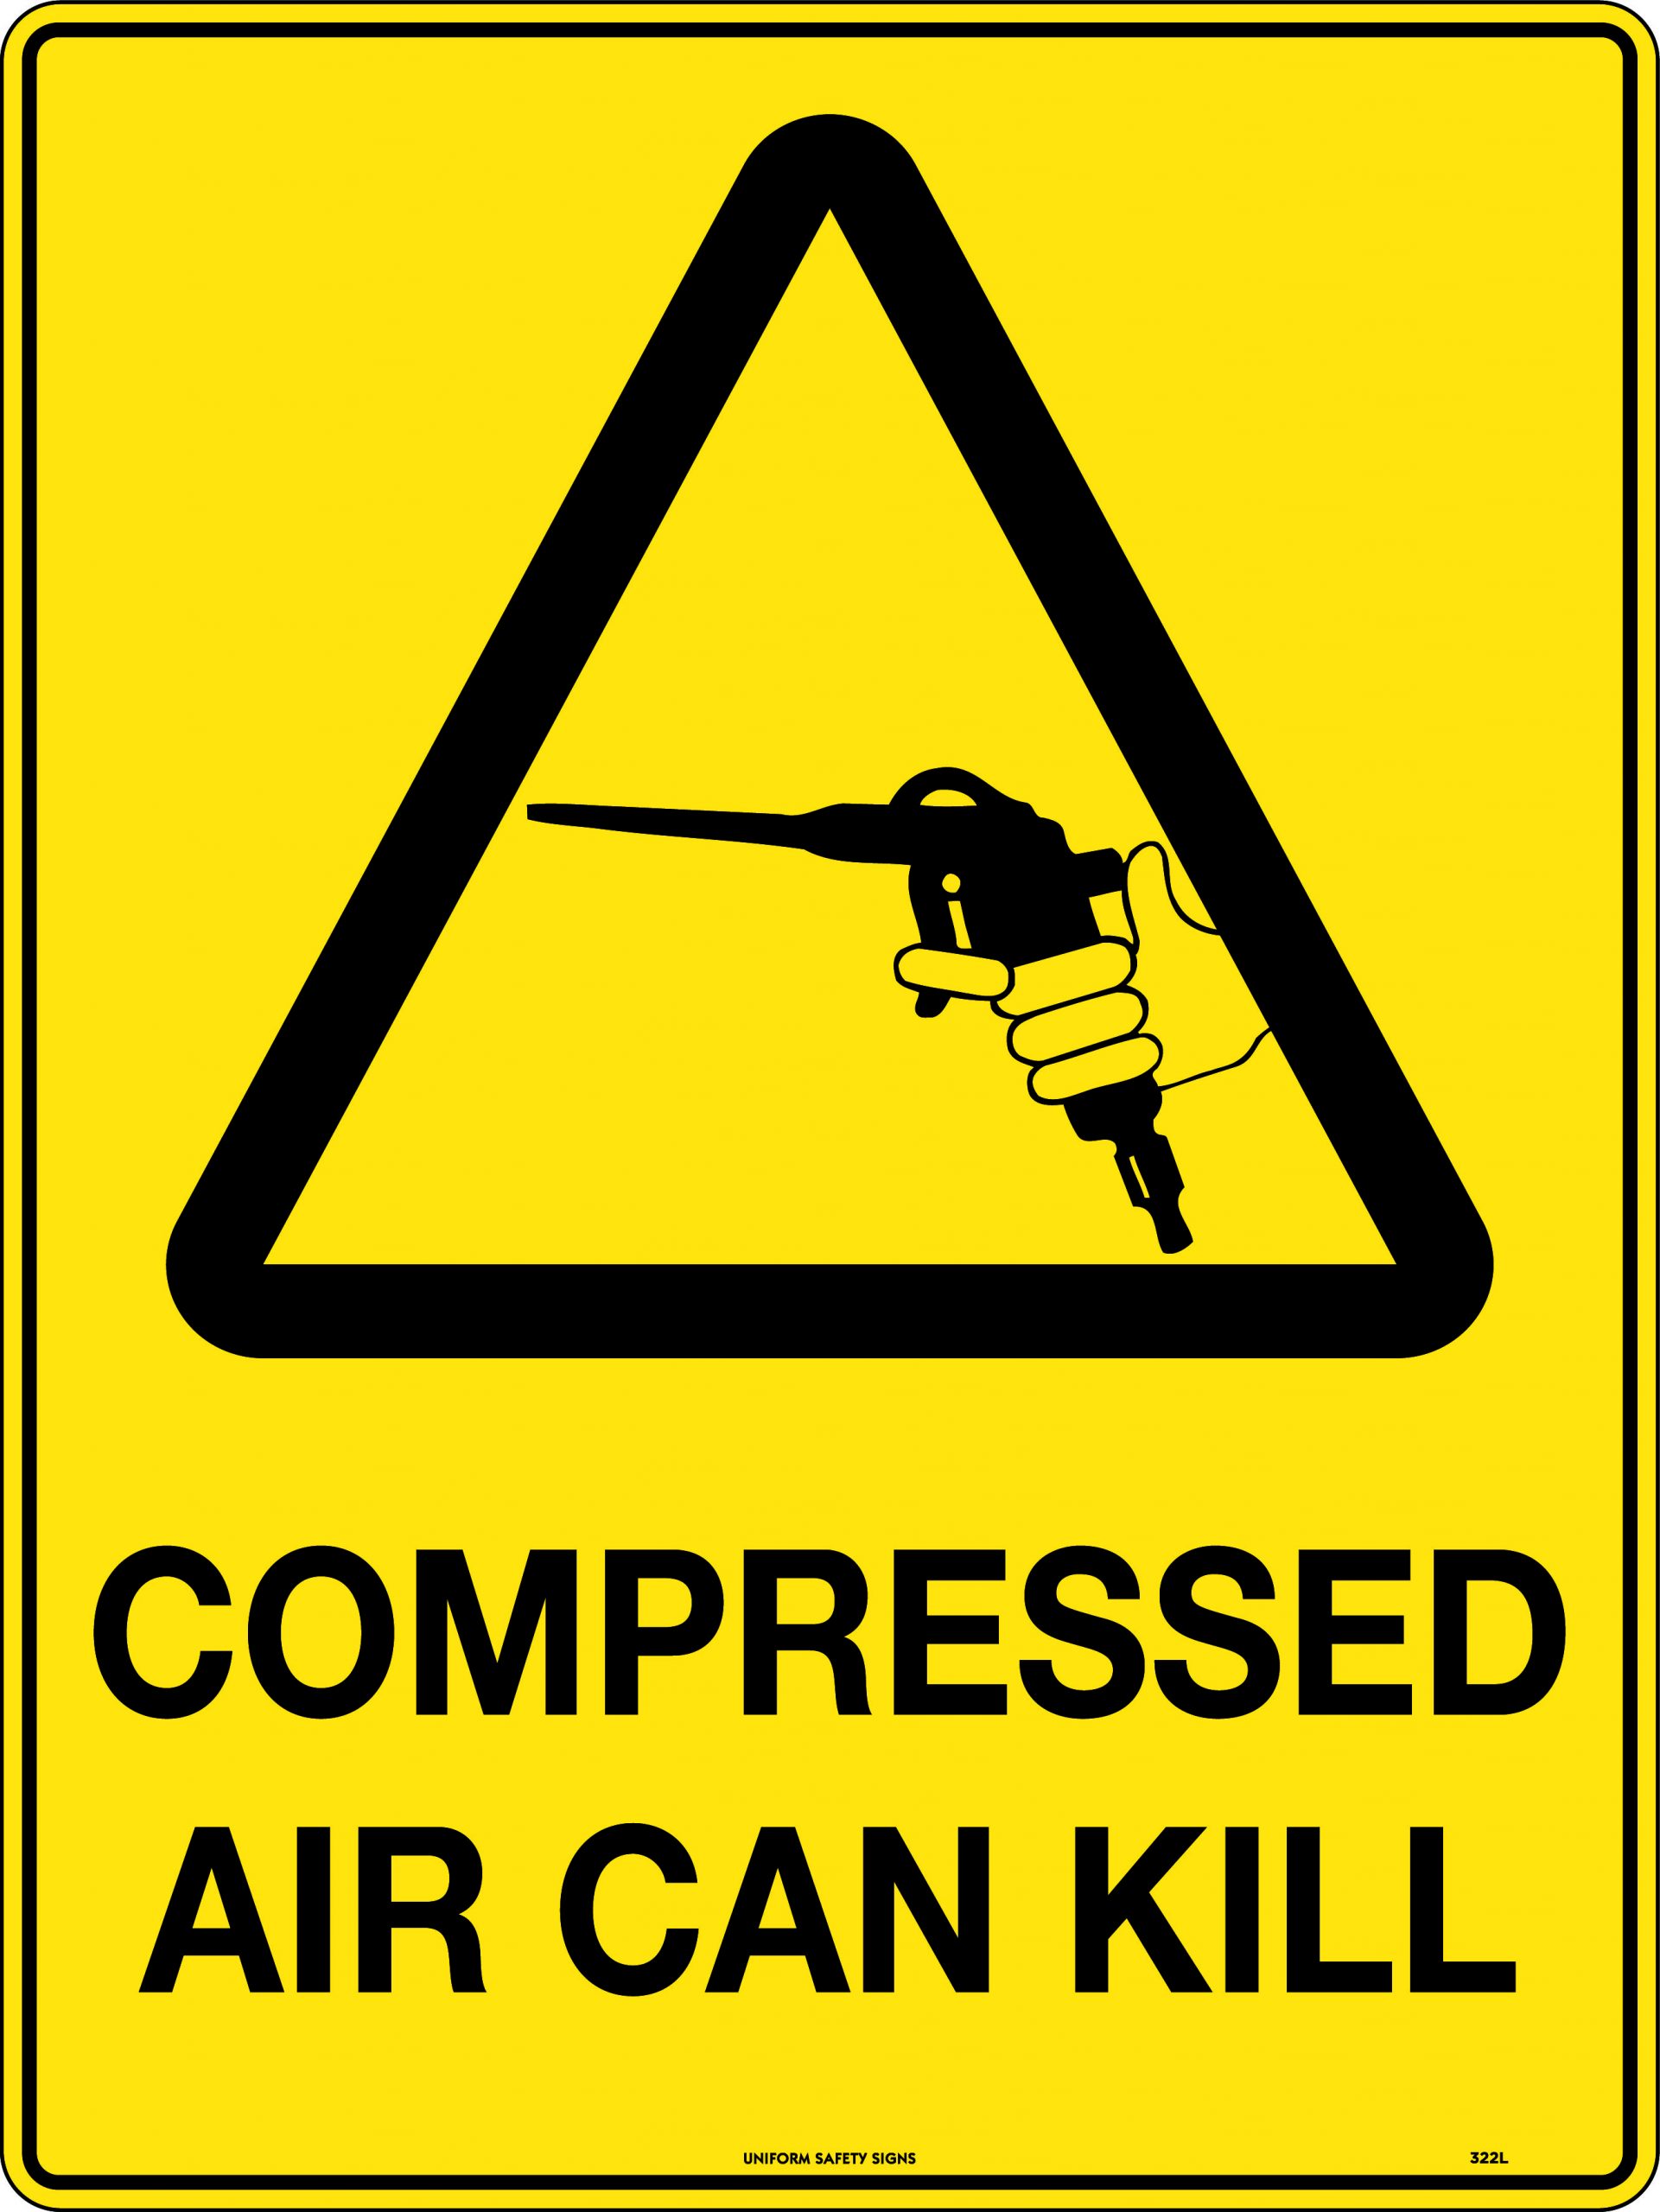 UNIFORM SAFETY 140X120MM SELF ADH 4/PKT CAUTION COMPRESSED AIR CAN KIL